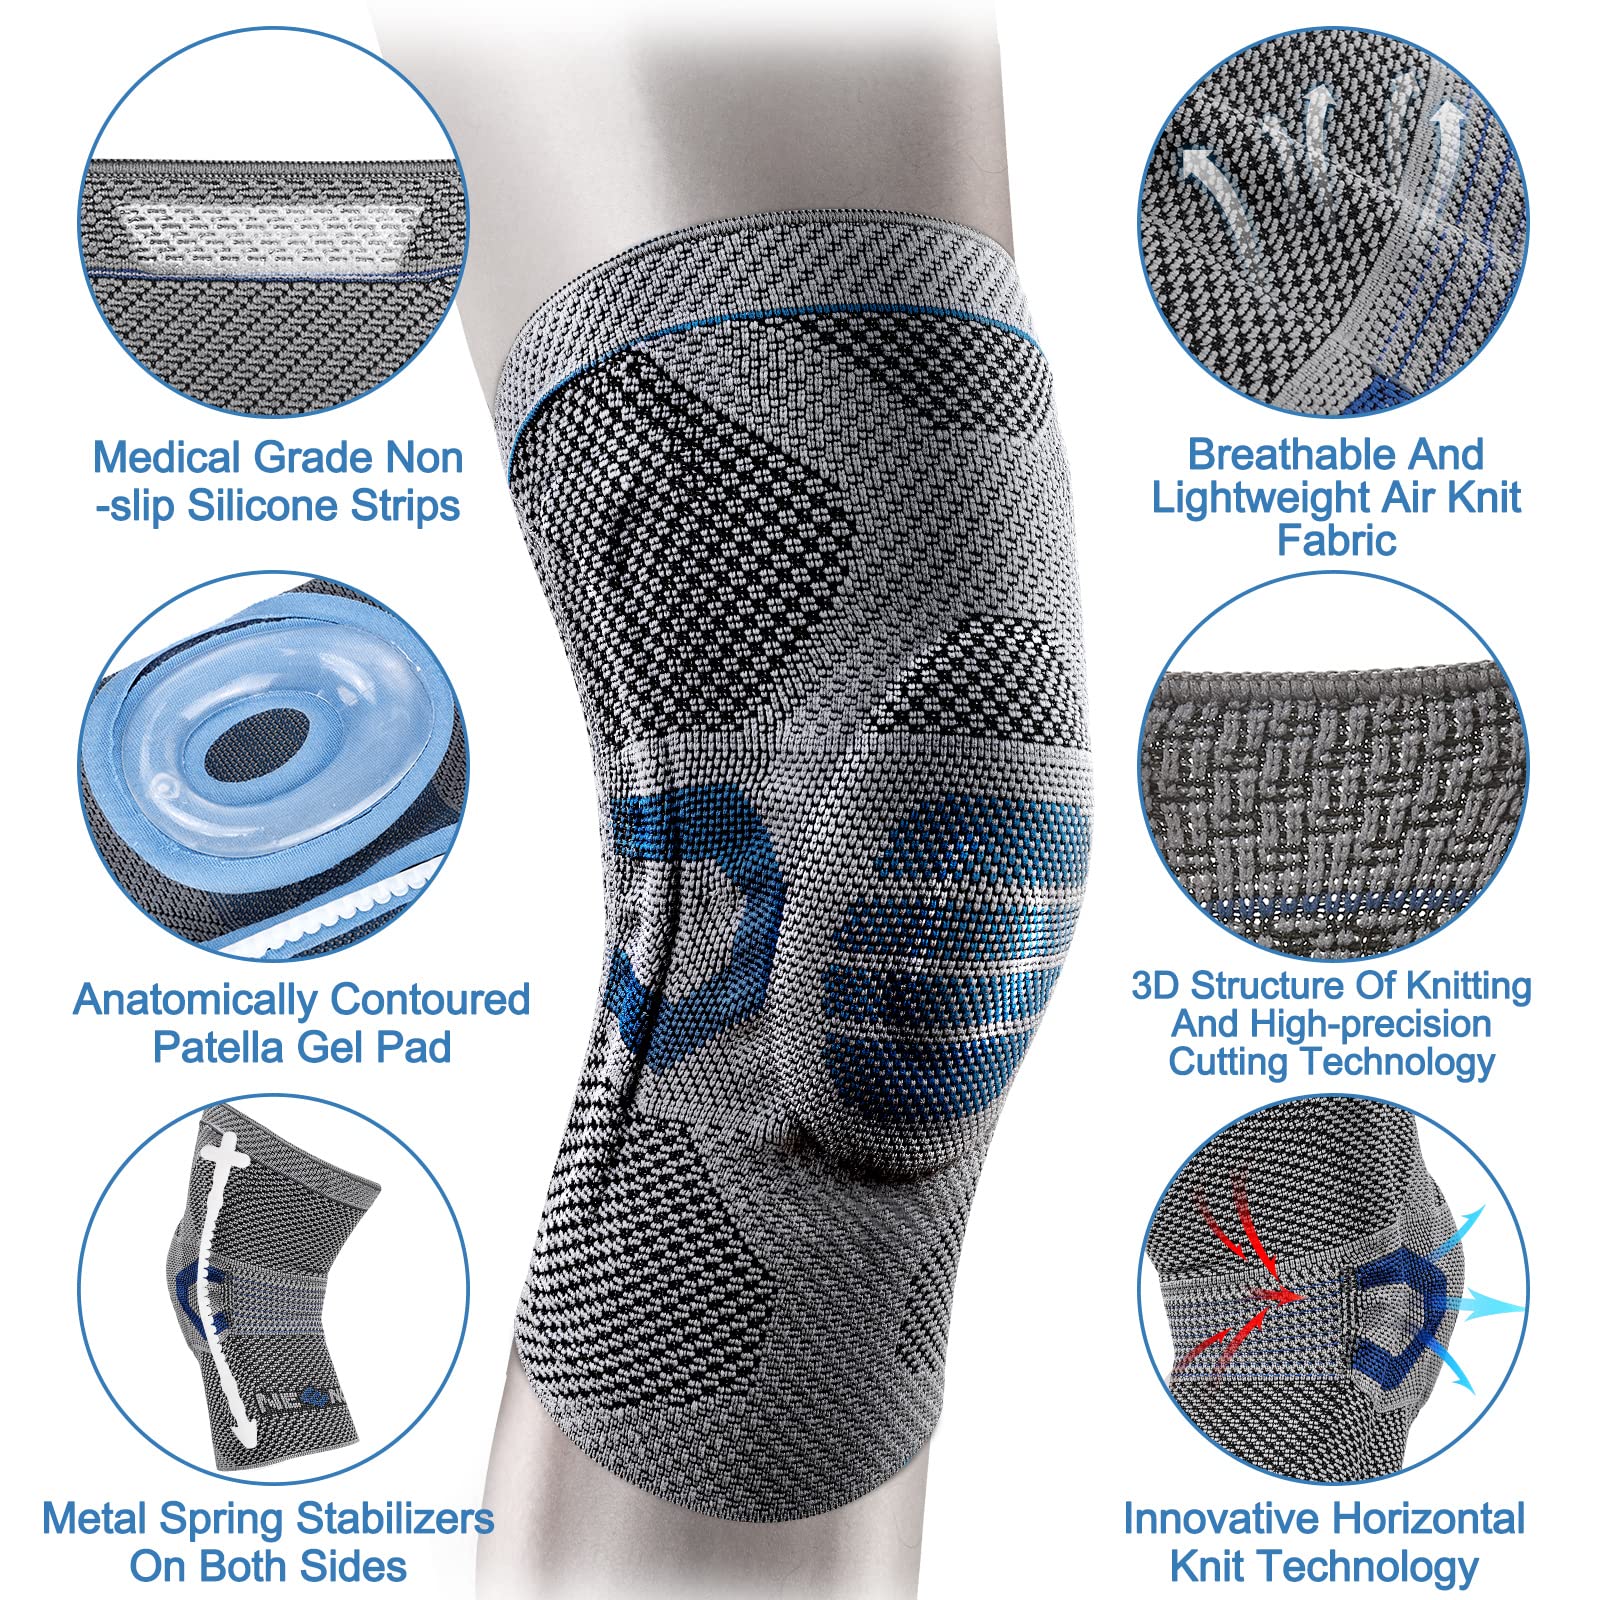  NEENCA Professional Knee Brace For Pain Relief